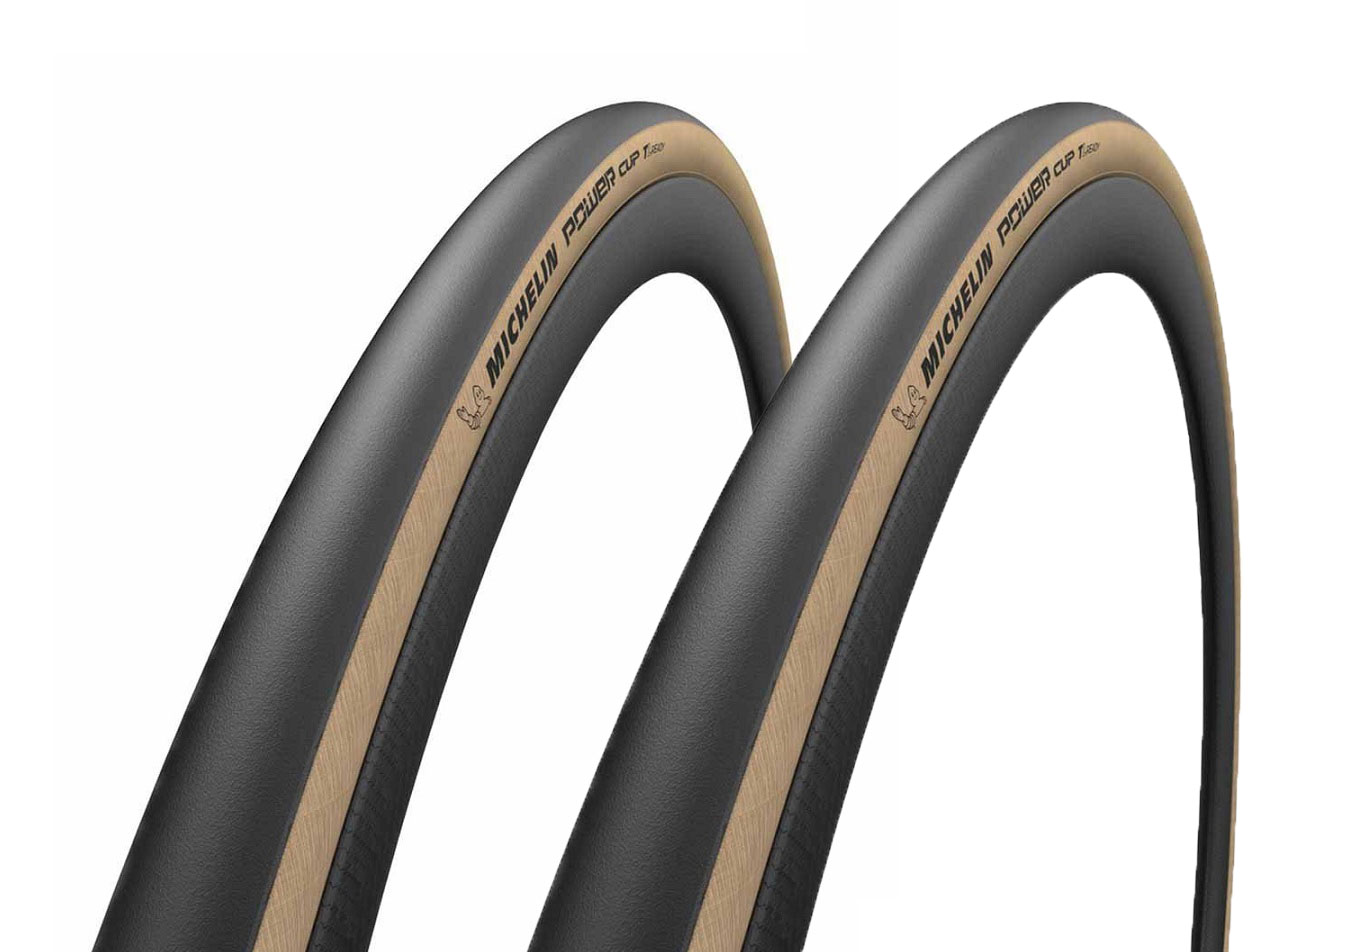 y2{Zbgz MICHELIN(~V) POWER CUP CLASSIC TUBELESS READY(p[ Jbv NVbN `[uXfB) 700~25C(25-622) [hoCNp`[uXfB^C TLR ykCEEn zsz